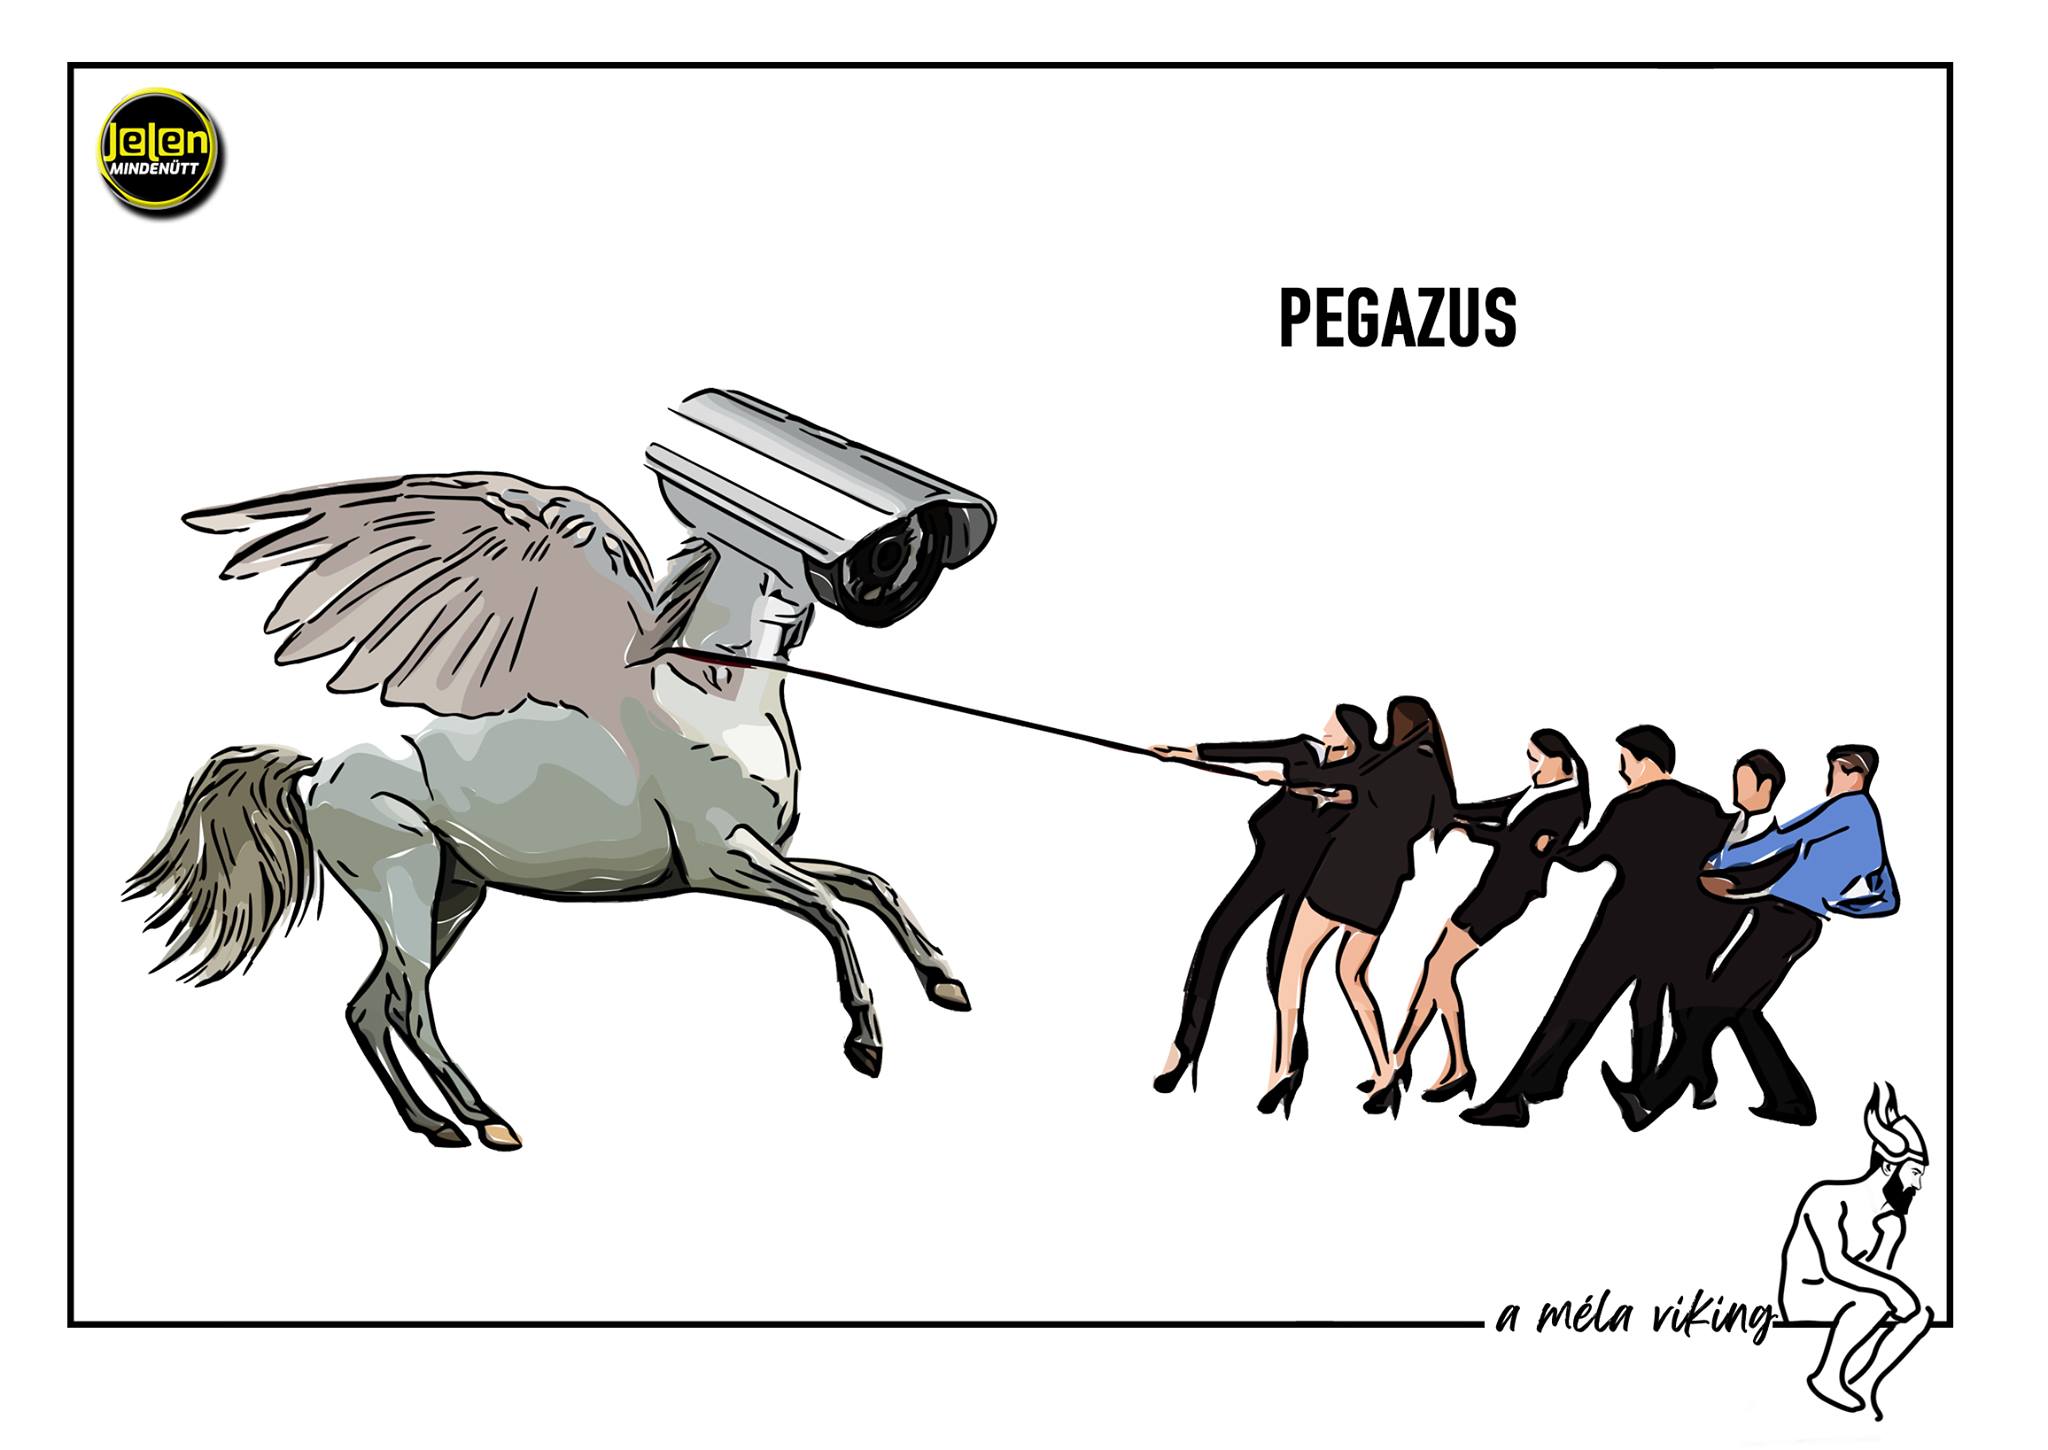 Pegasus-scandal: Orbán Government’s Skulking Threat to European Community